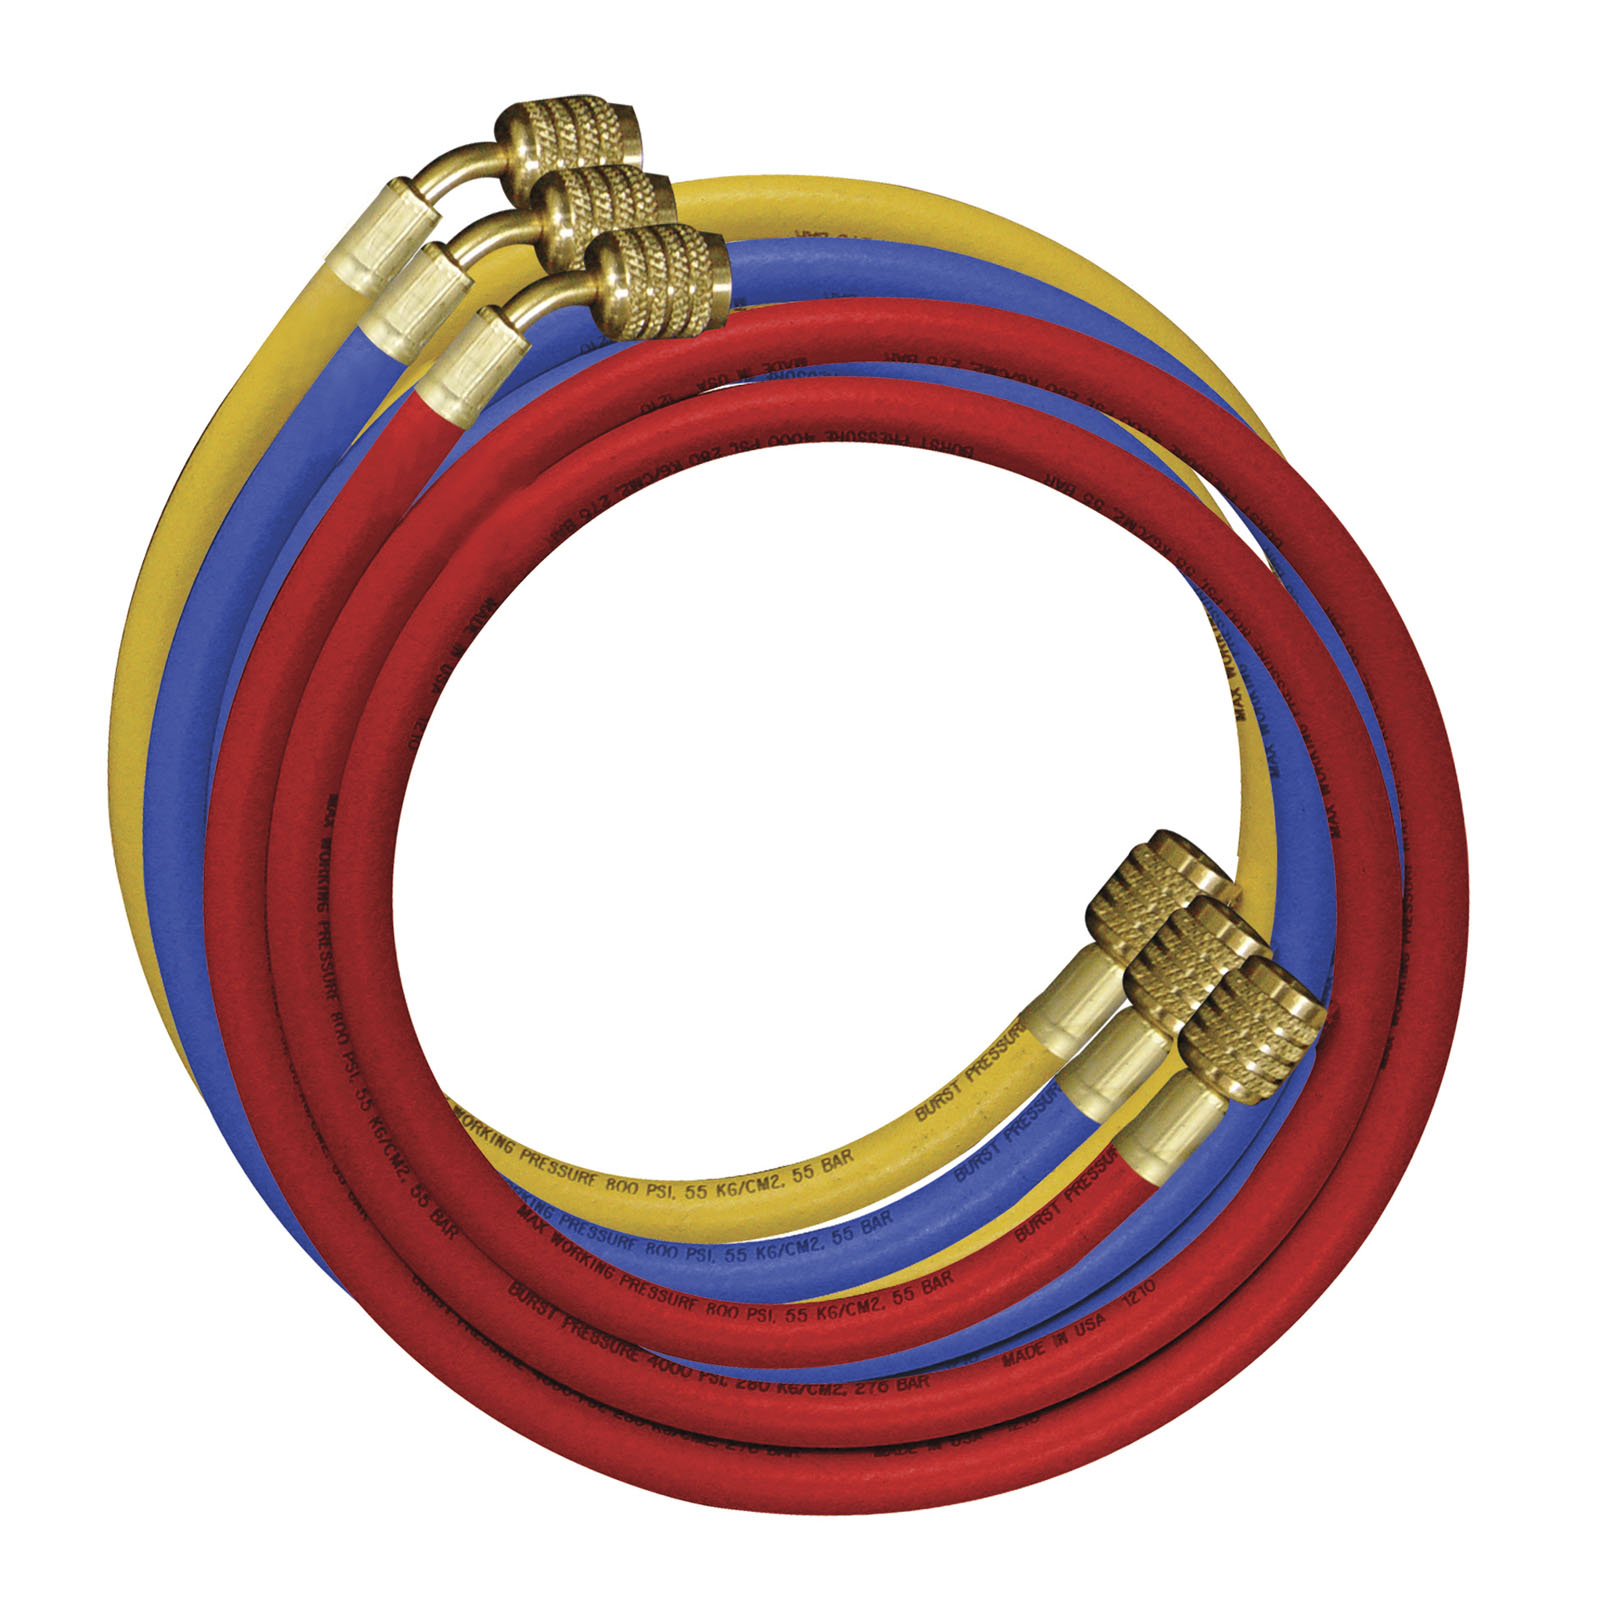 Mastercool 49262-36 AC 3FT Hose set With Valves W800 B4000psi R-410A made in USA 